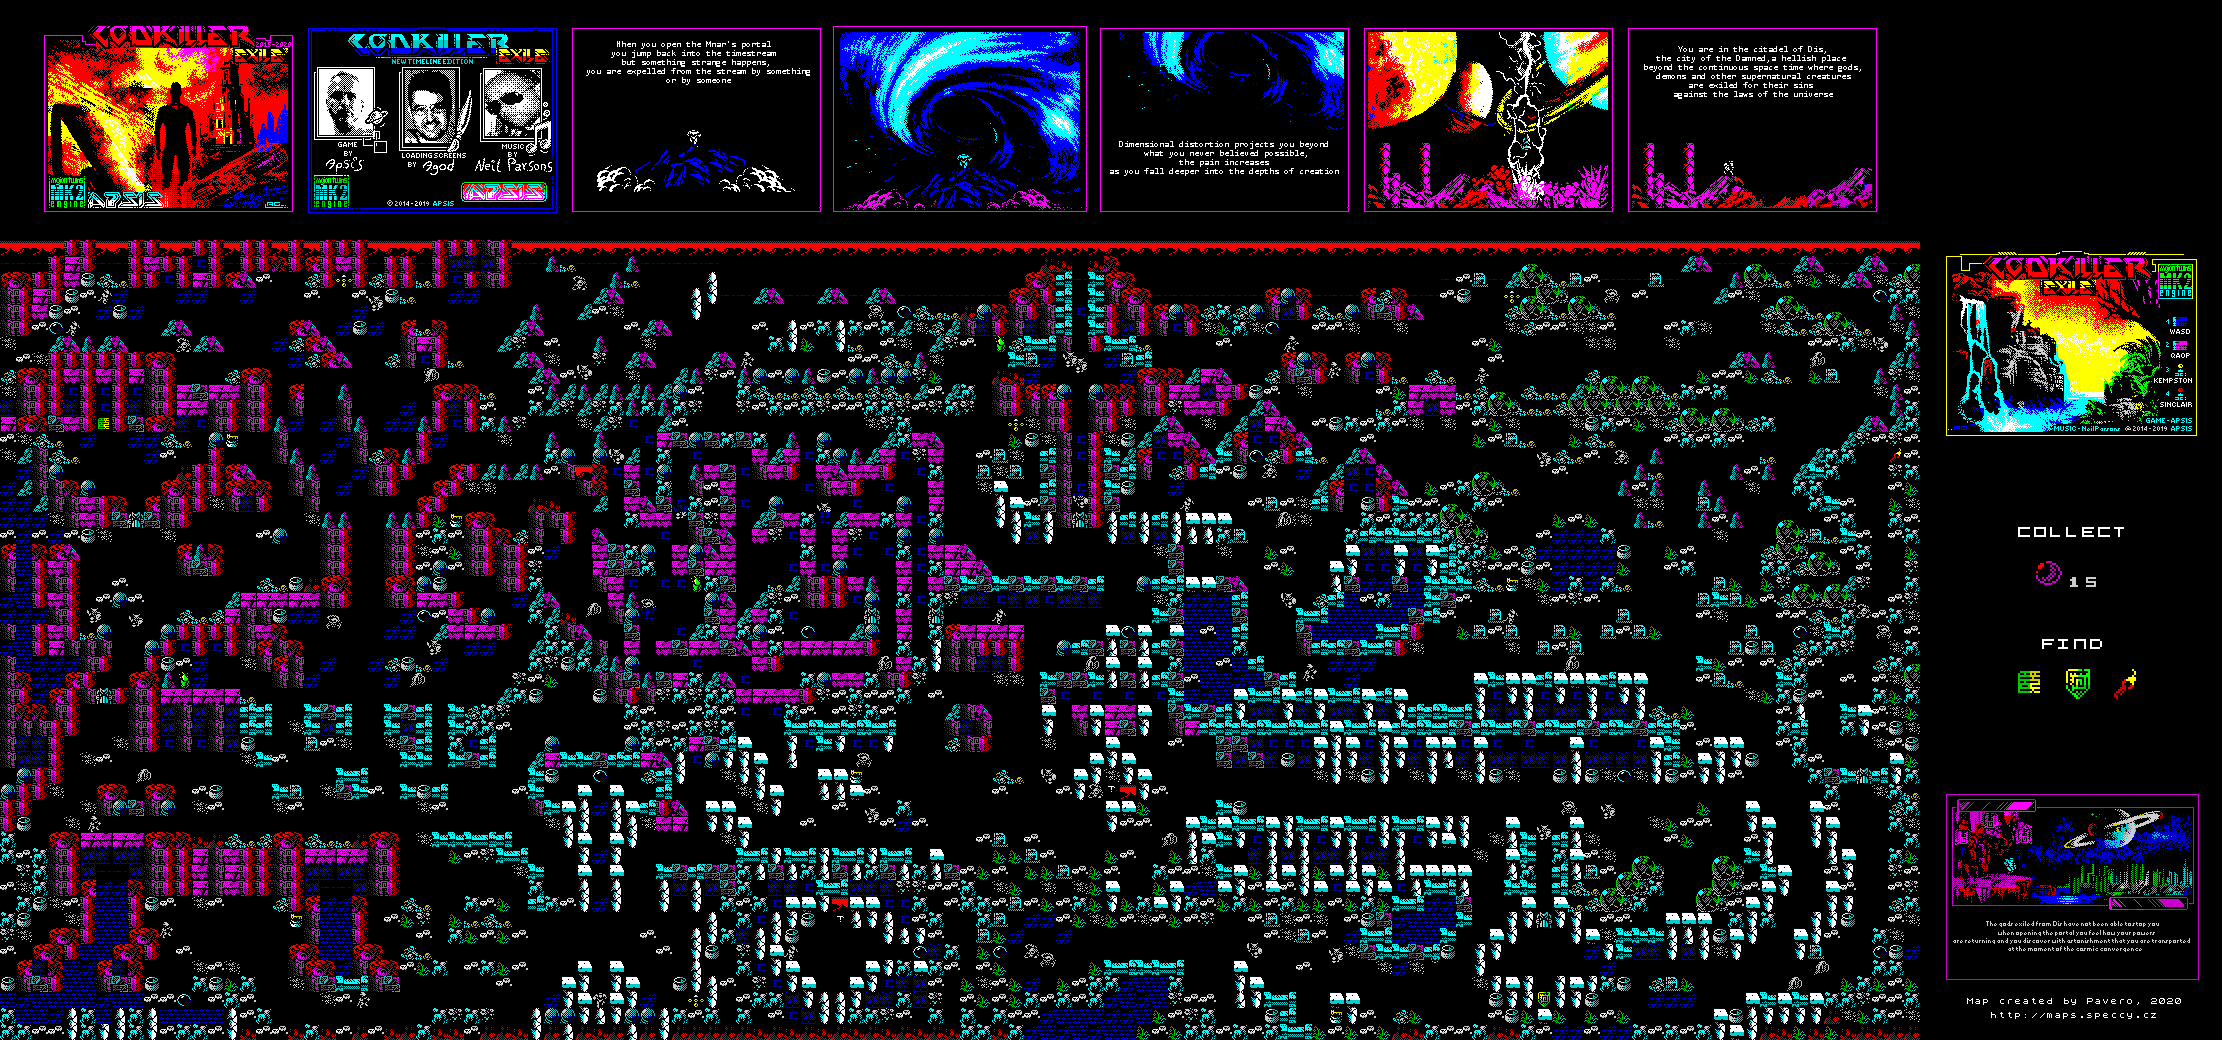 Godkiller 2 - Exile (New Timeline Edition) - The Map